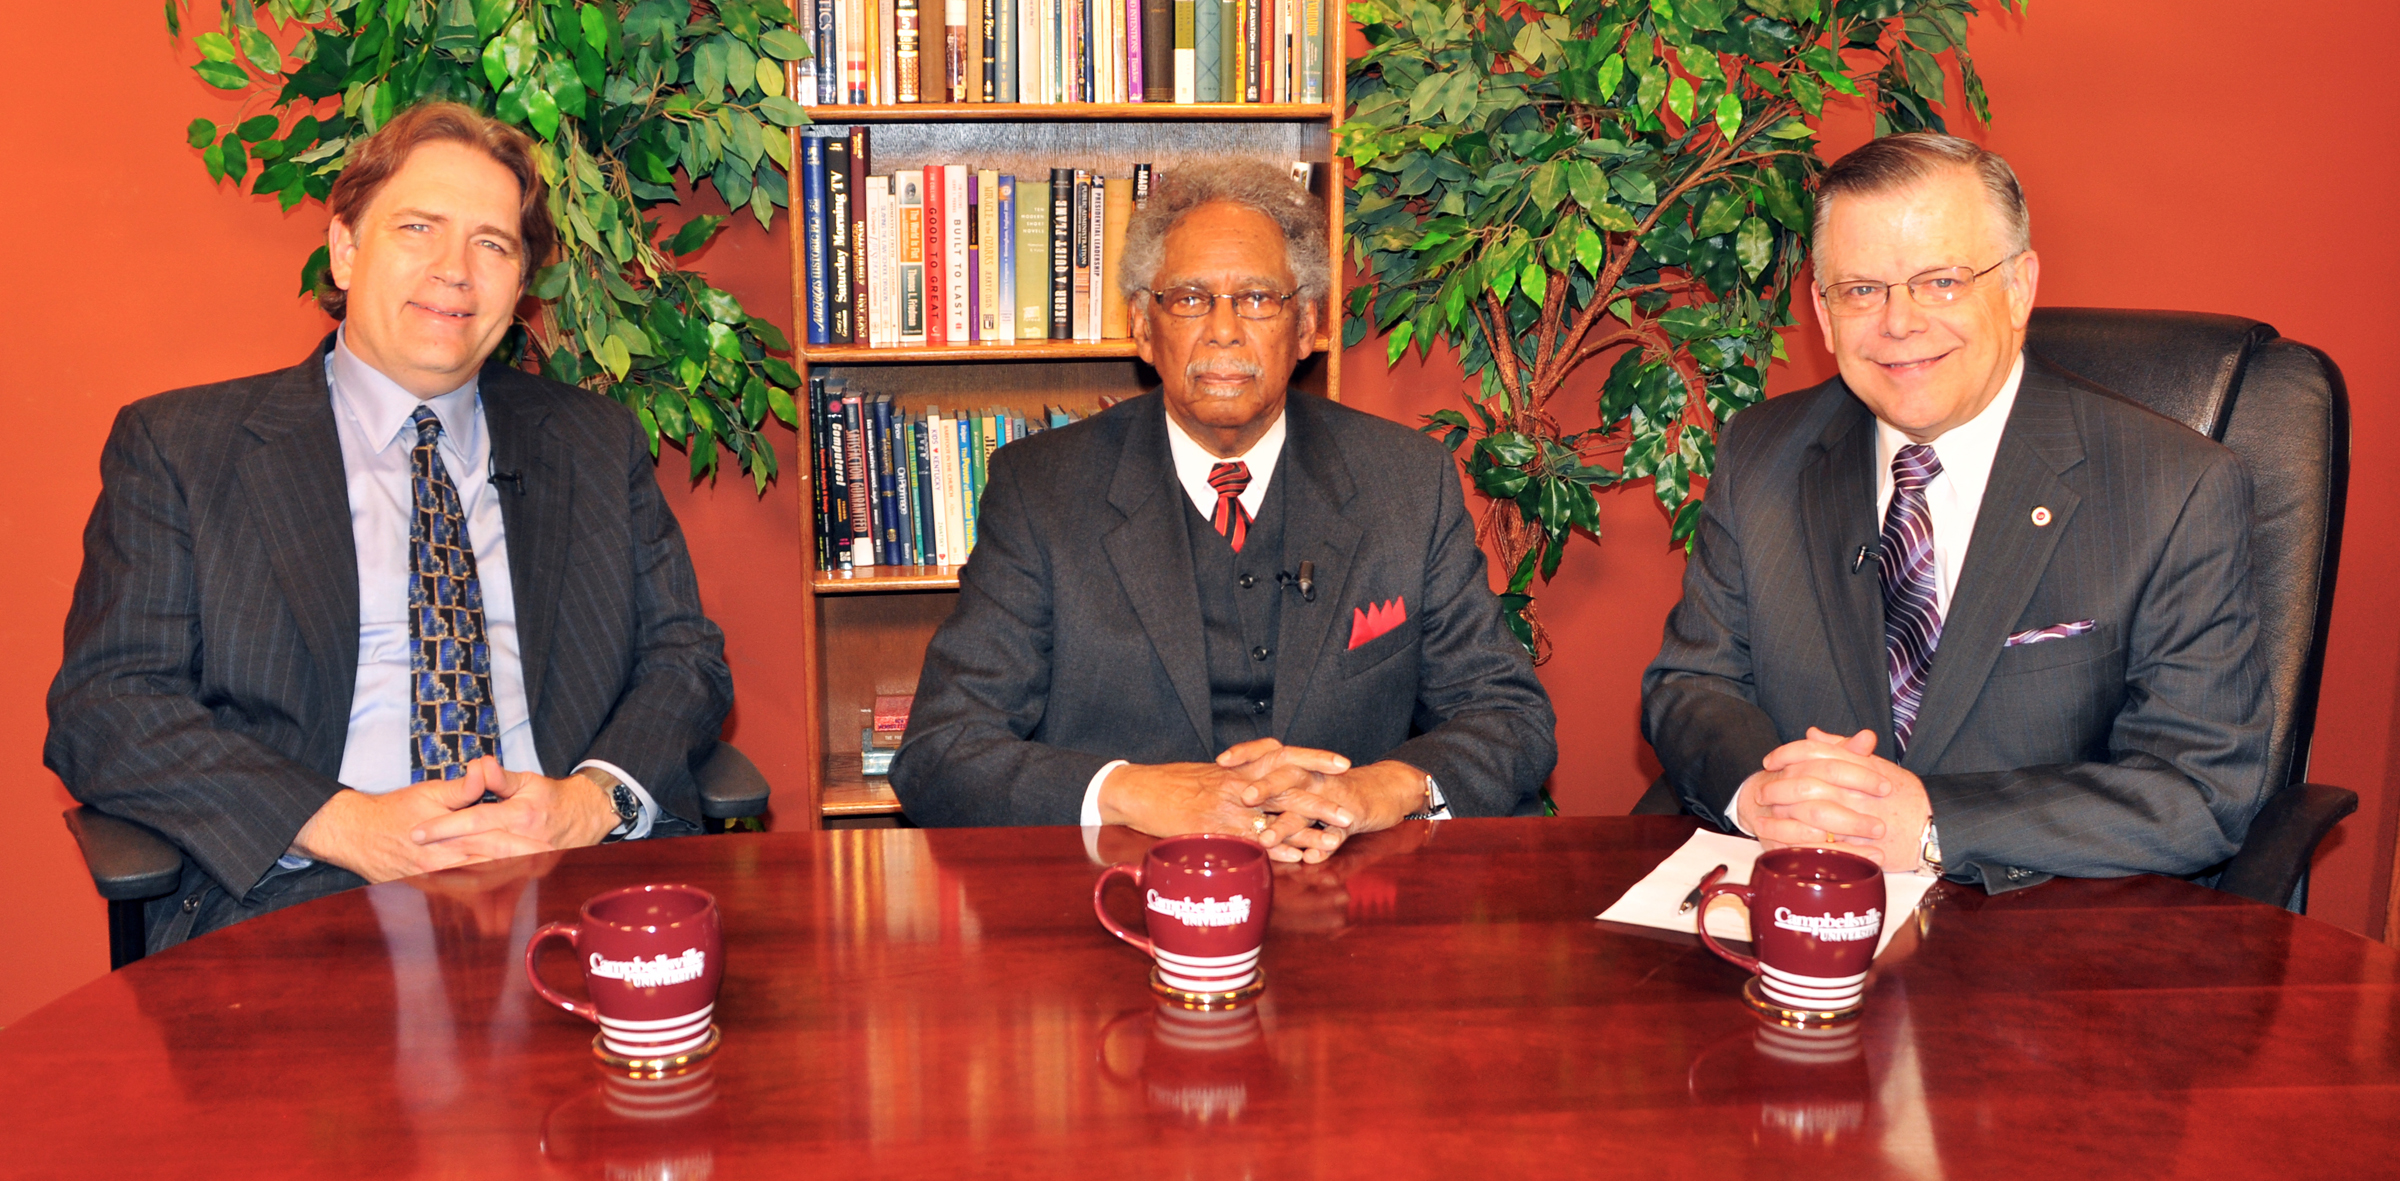 Campbellsville University's WLCU TV-4 will air a "Dialogue on Public Issues" show with Dr. Leslie Hollon, senior pastor of Trinity Baptist Church in Antonio, Texas, on left, and Dr. Lincoln Bingham, senior pastor at St. Paul Baptist Church in Louisville, Ky., beginning Sunday, Feb. 28. Hollon, at left, and Bingham are shown with John Chowning, vice president for church and external relations and executive assistant to the president at CU. The show will air on WLCU TV-4, Comcast Cable Channel 10, Sunday, Feb. 28, at 8 a.m.; Monday, March 1, at 1:30 p.m. and 6:30 p.m.; and Wednesday, March 3, at 1:30 p.m. and 7 p.m. (Campbellsville University photo by Bayarmagnai “Max” Nergui)